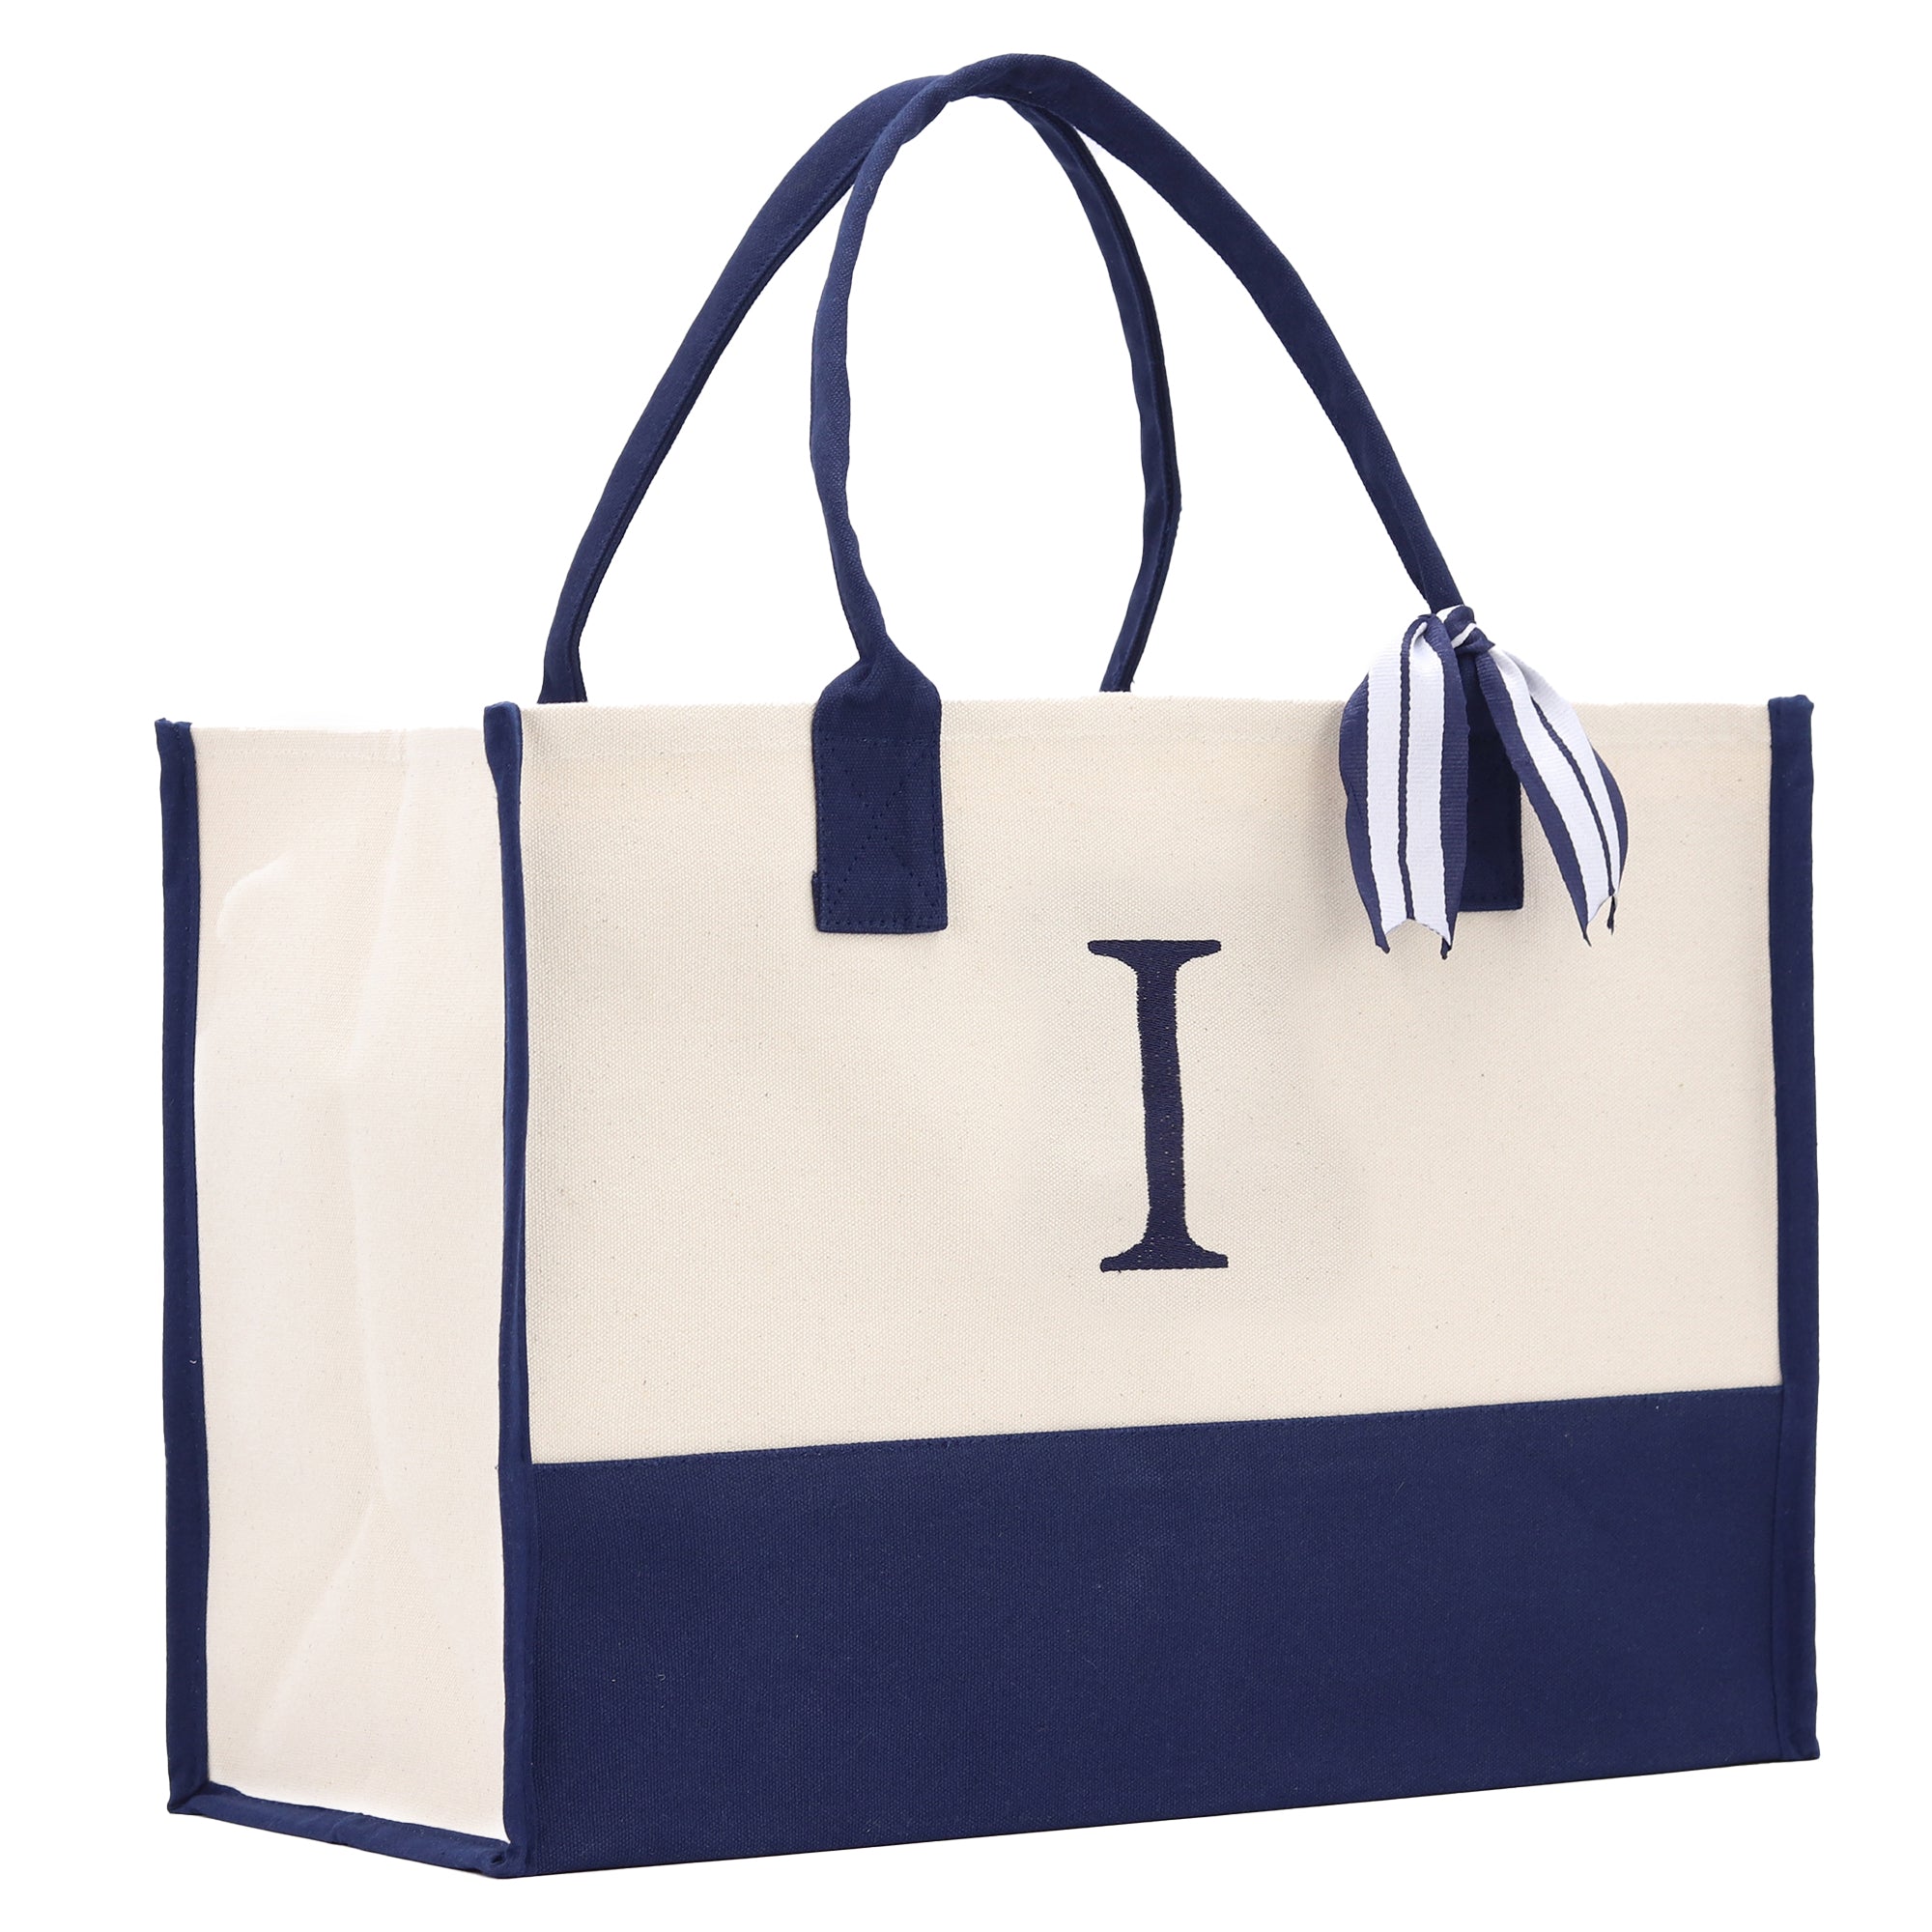 Monogram Tote Bag with 100% Cotton Canvas and a Chic Personalized Monogram Navy Blue Vanessa Rosella Block I 